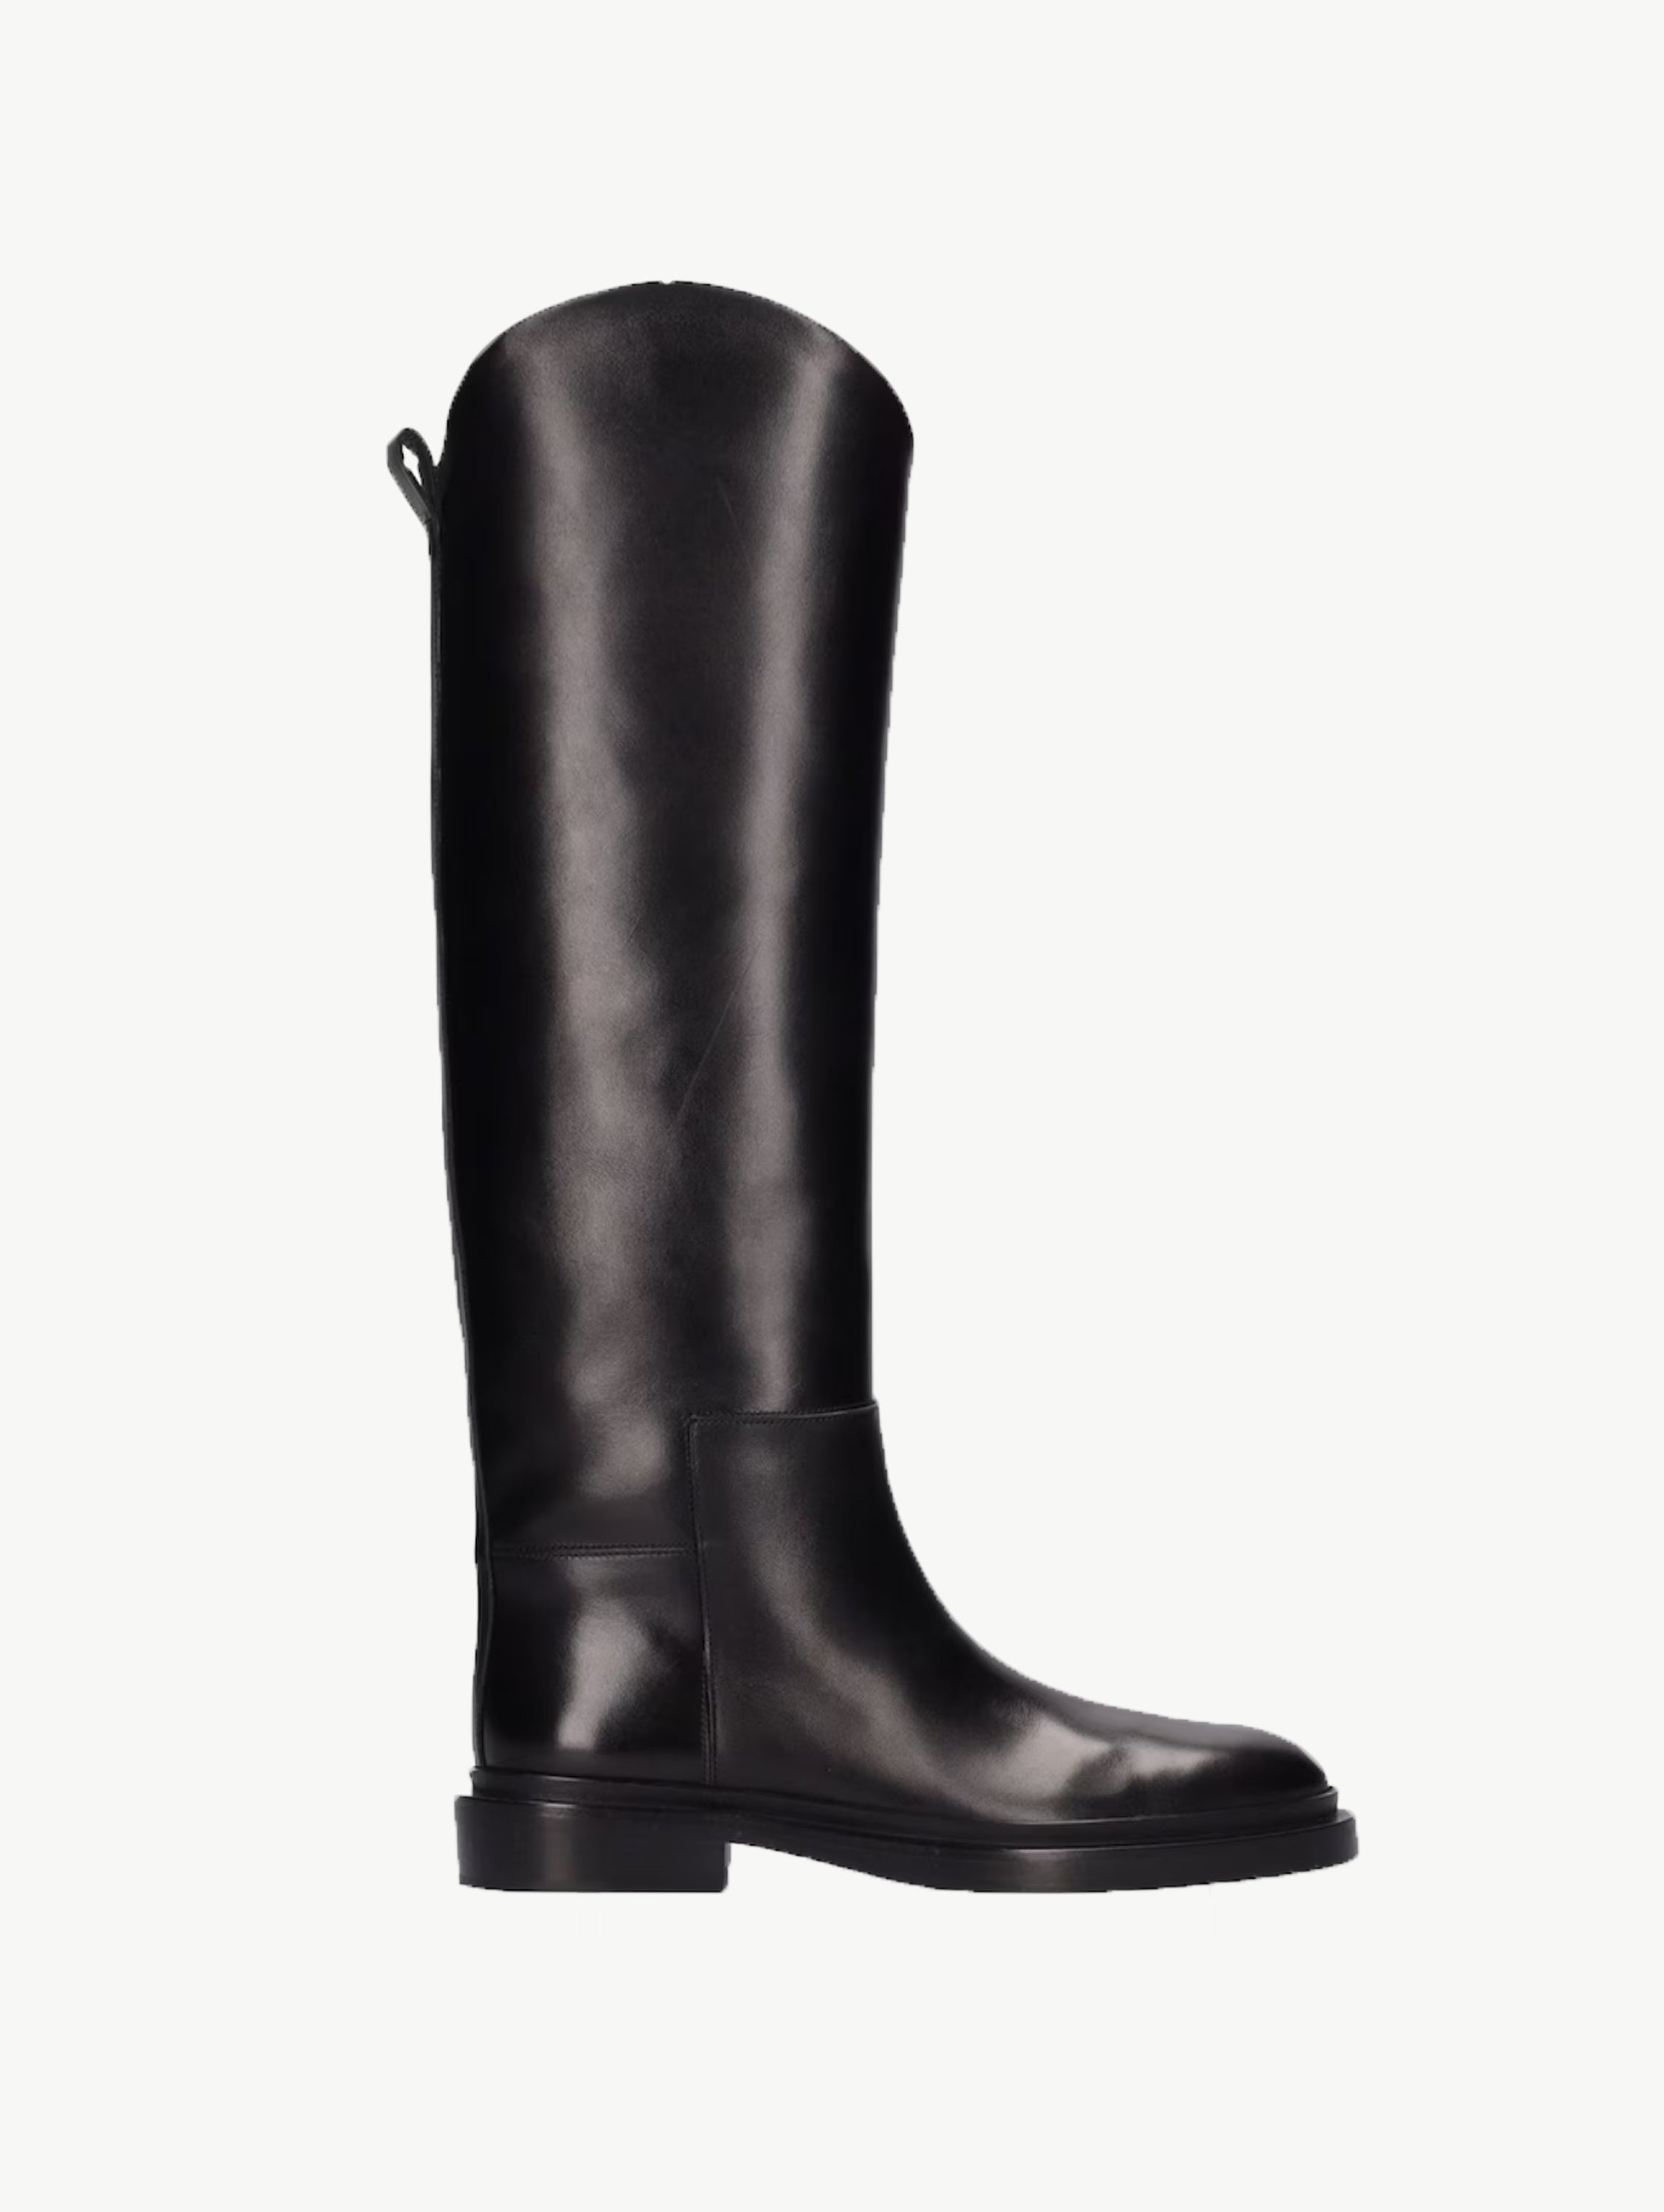 25mm leather riding boots